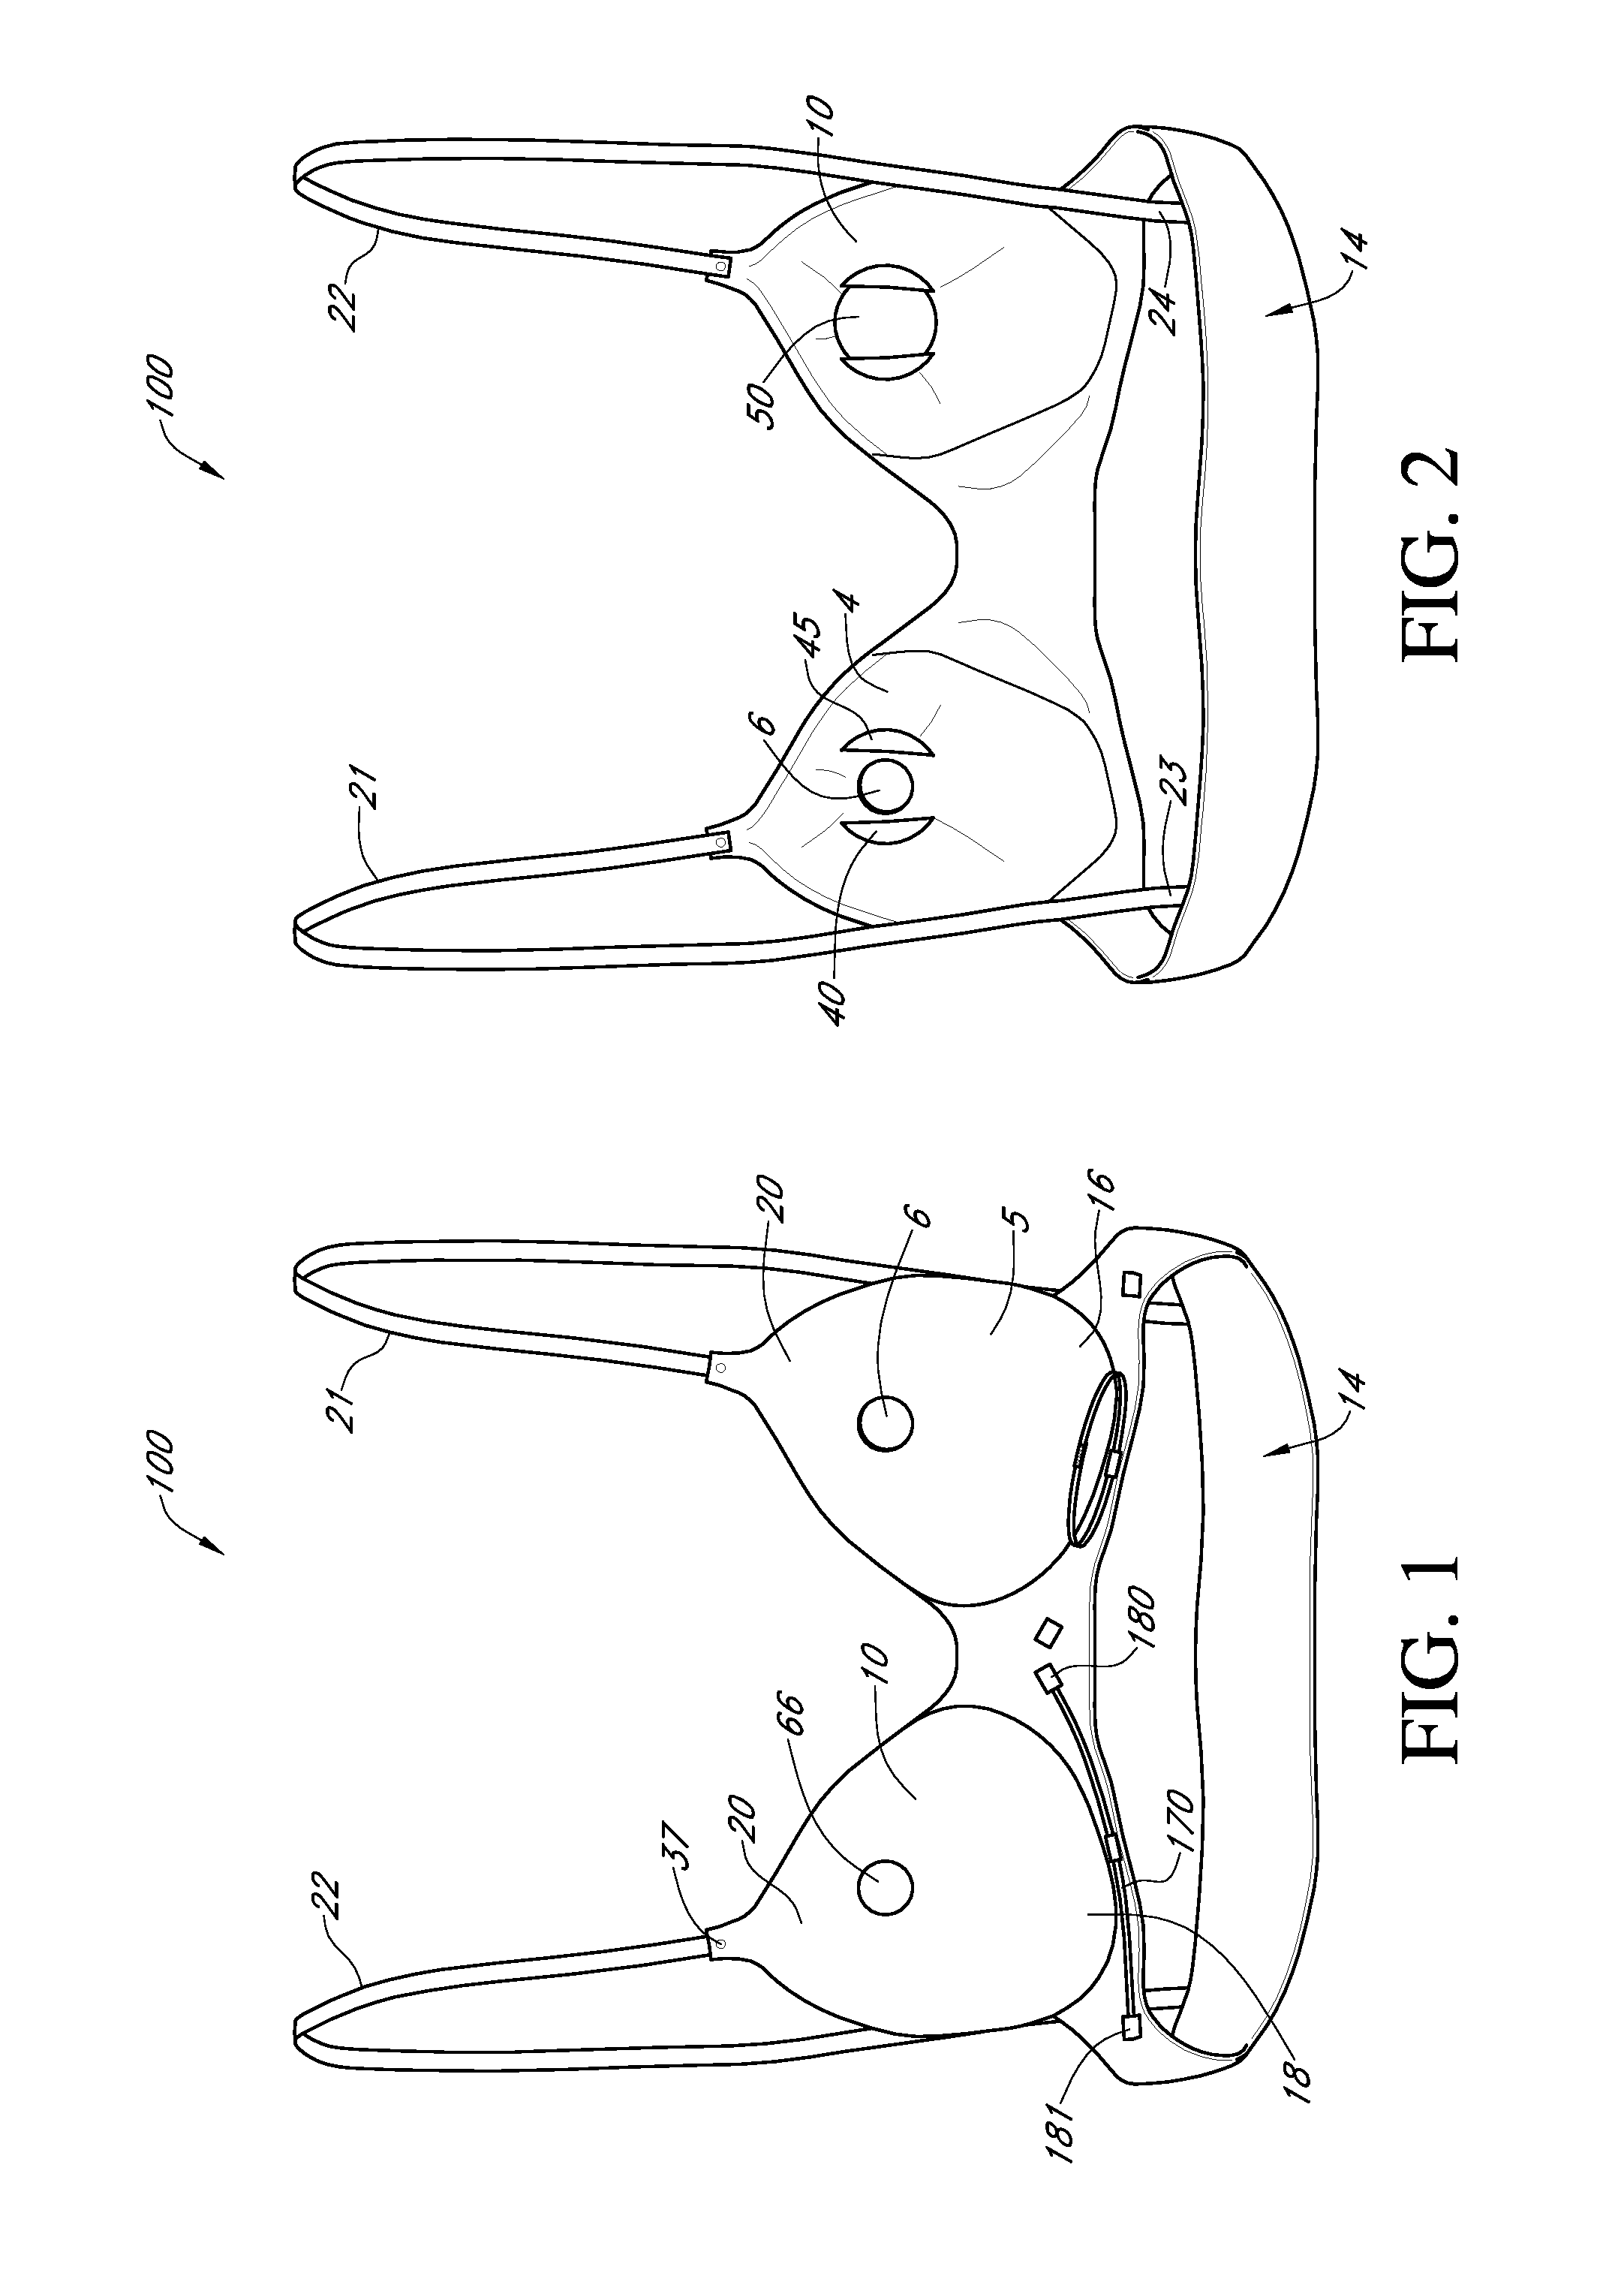 Brassiere configured to receive breast pump receptacle